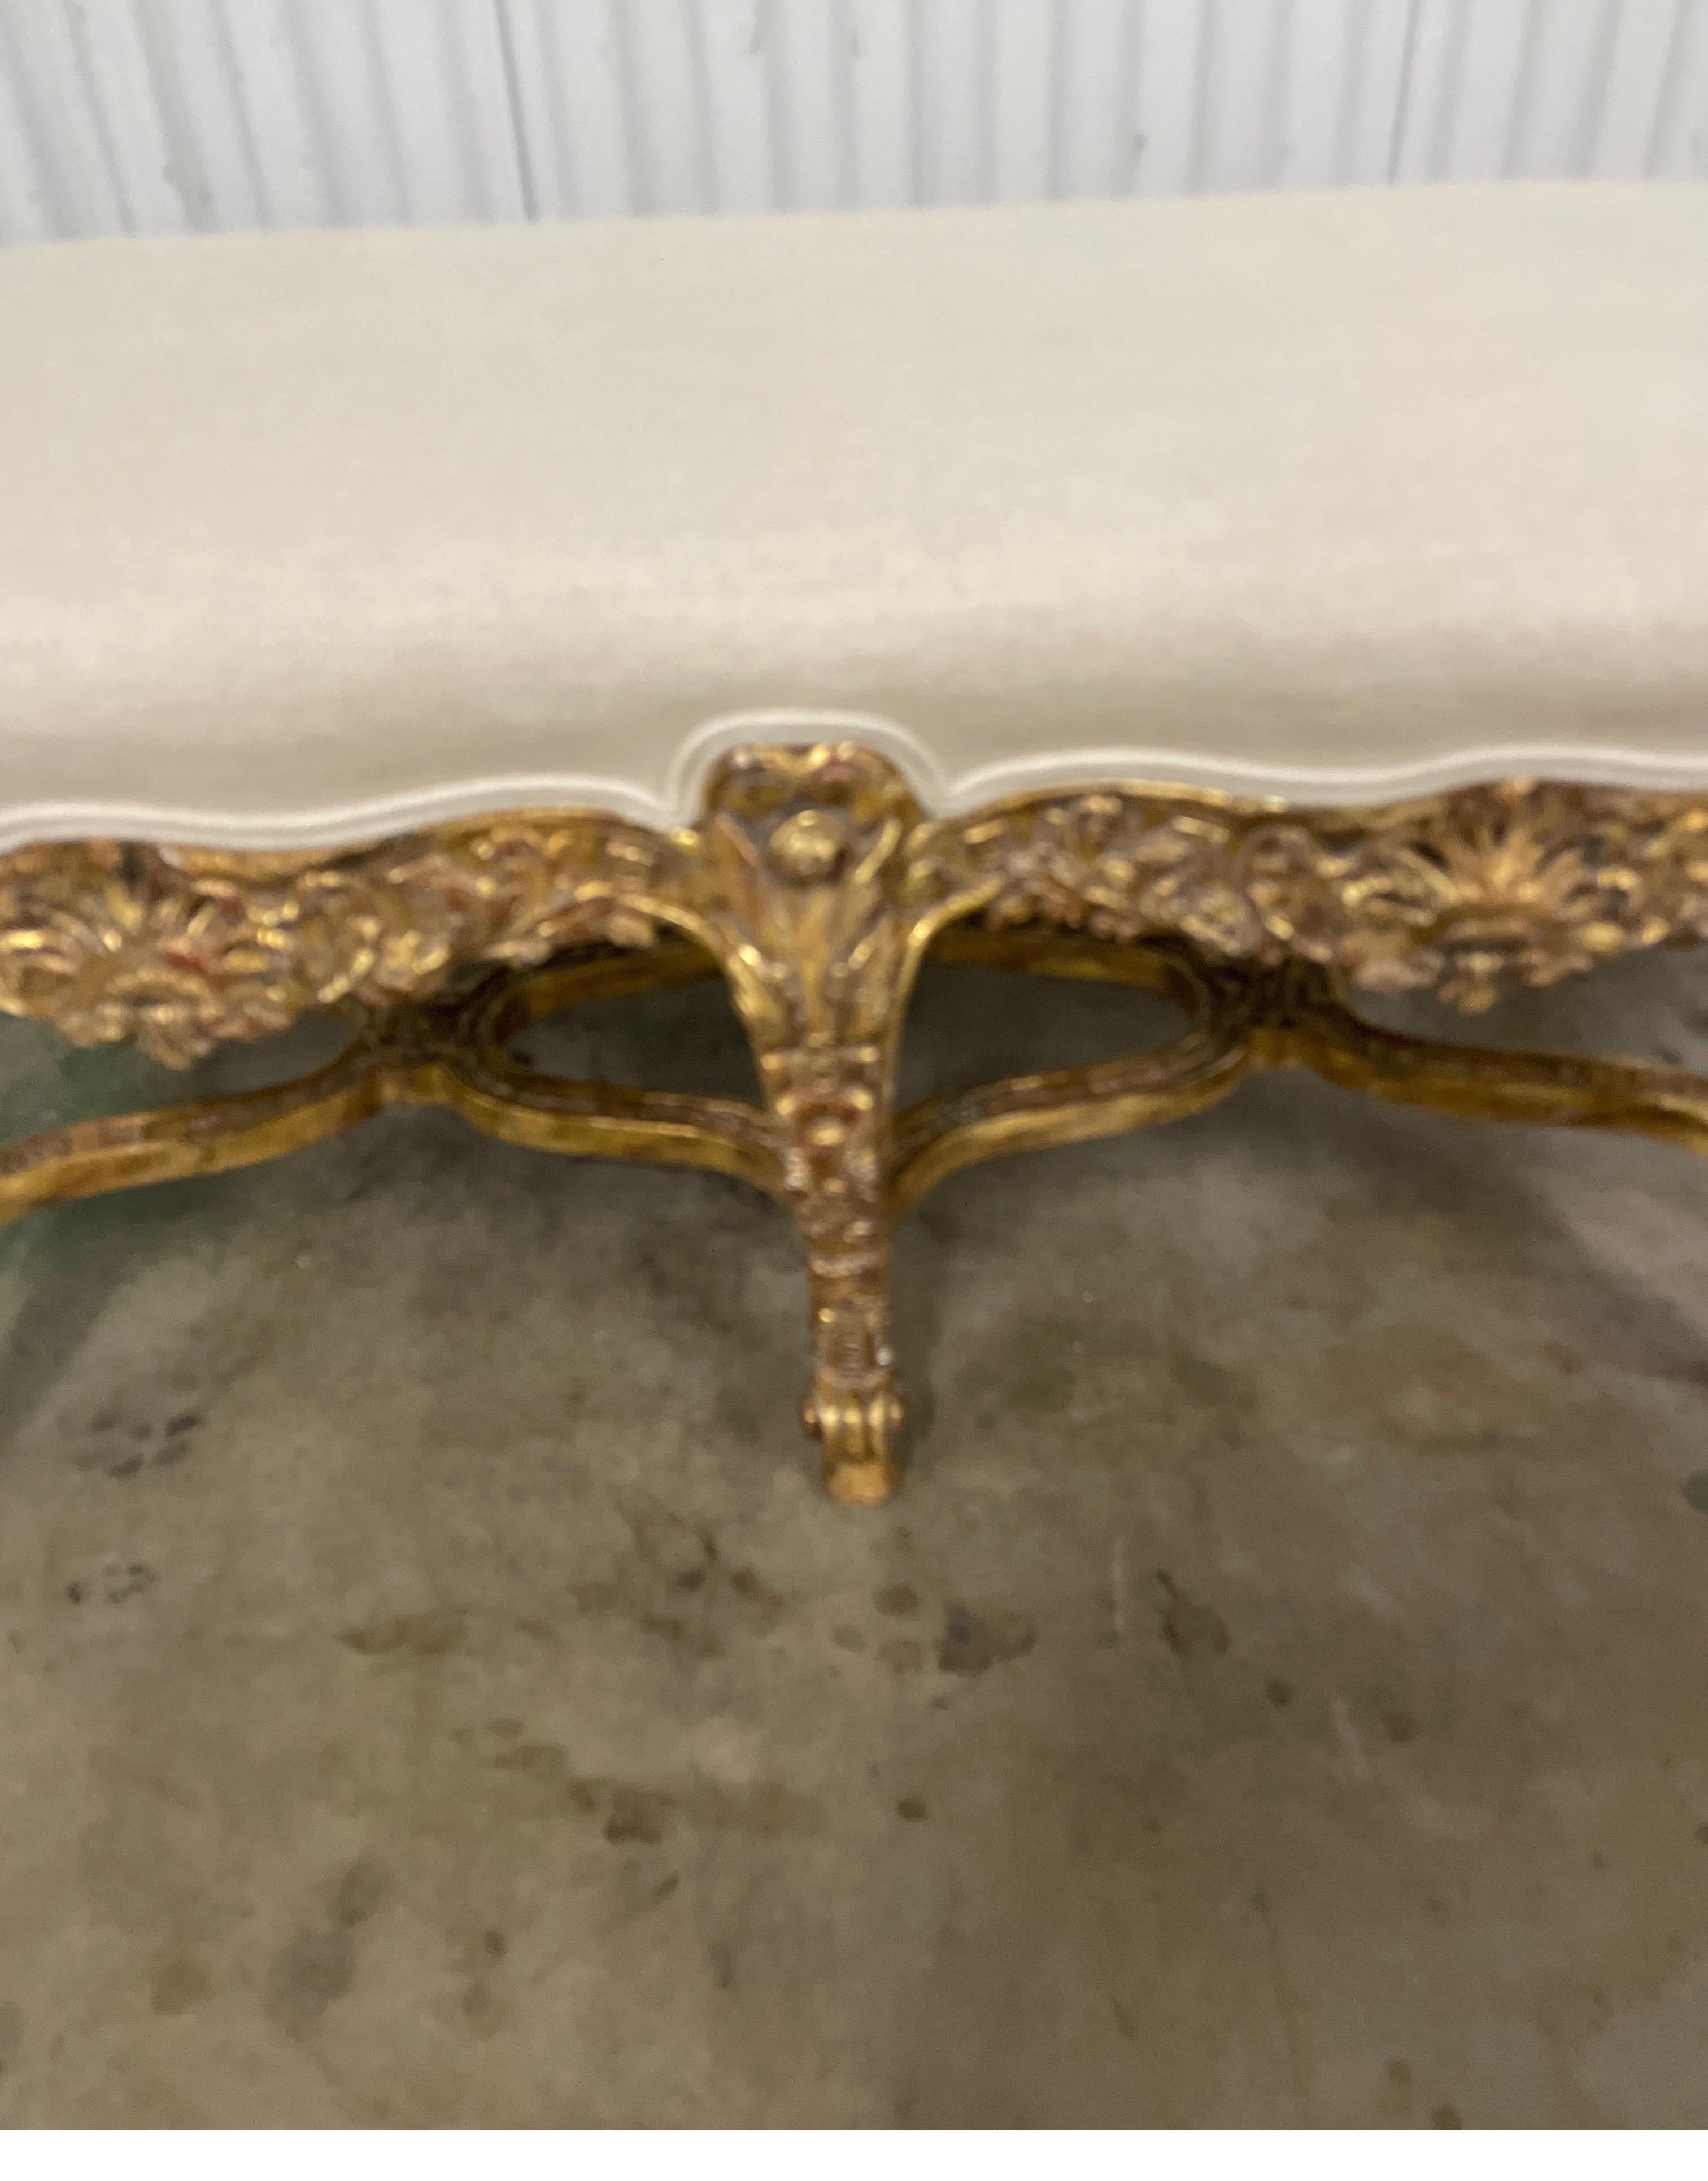 Antique Italian giltwood rococo style bench newly upholstered in a natural linen fabric. This stunning bench rests on six legs connected by an X stretcher. Intricate details and gilding.